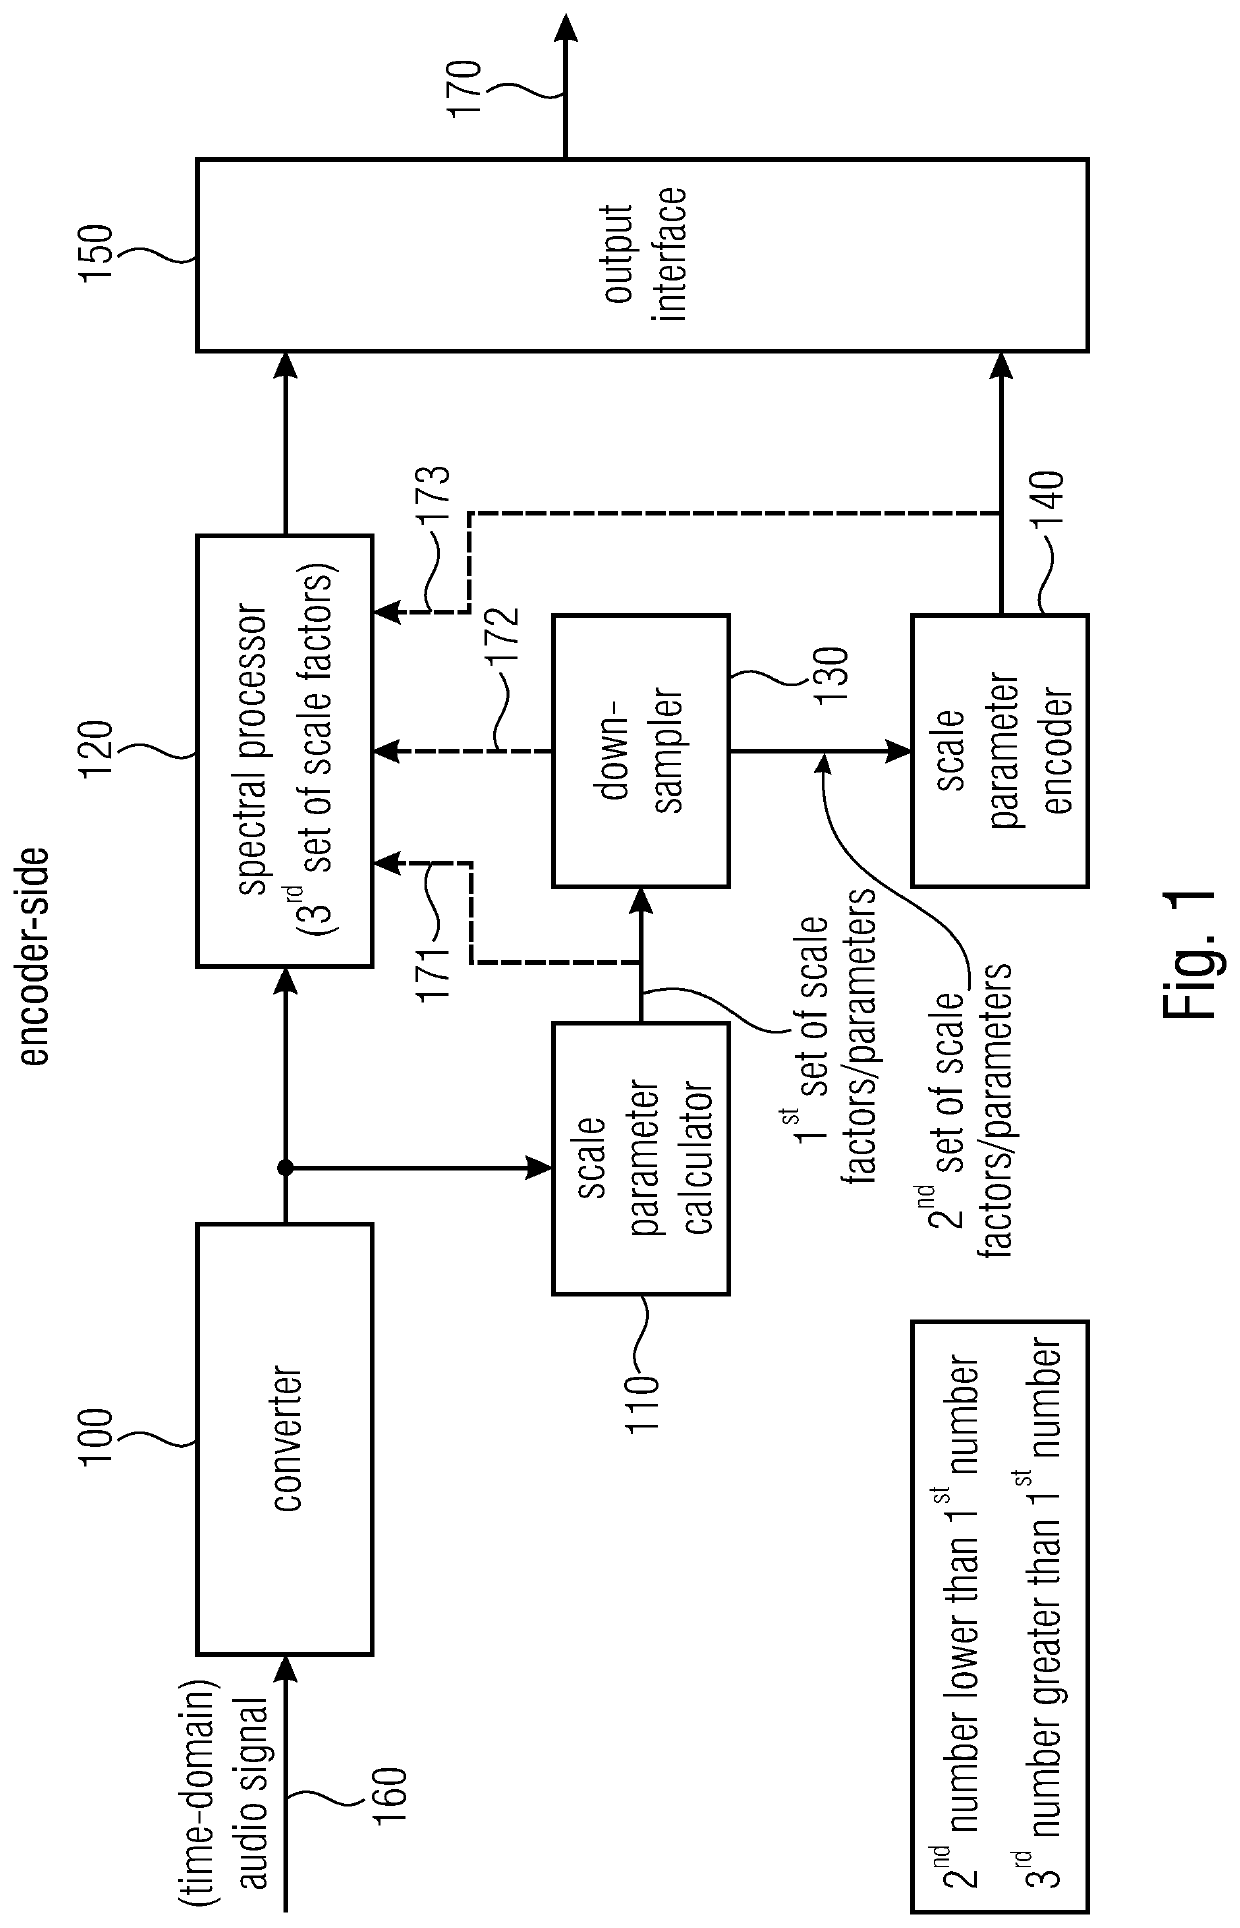 Apparatus and method for encoding and decoding an audio signal using downsampling or interpolation of scale parameters